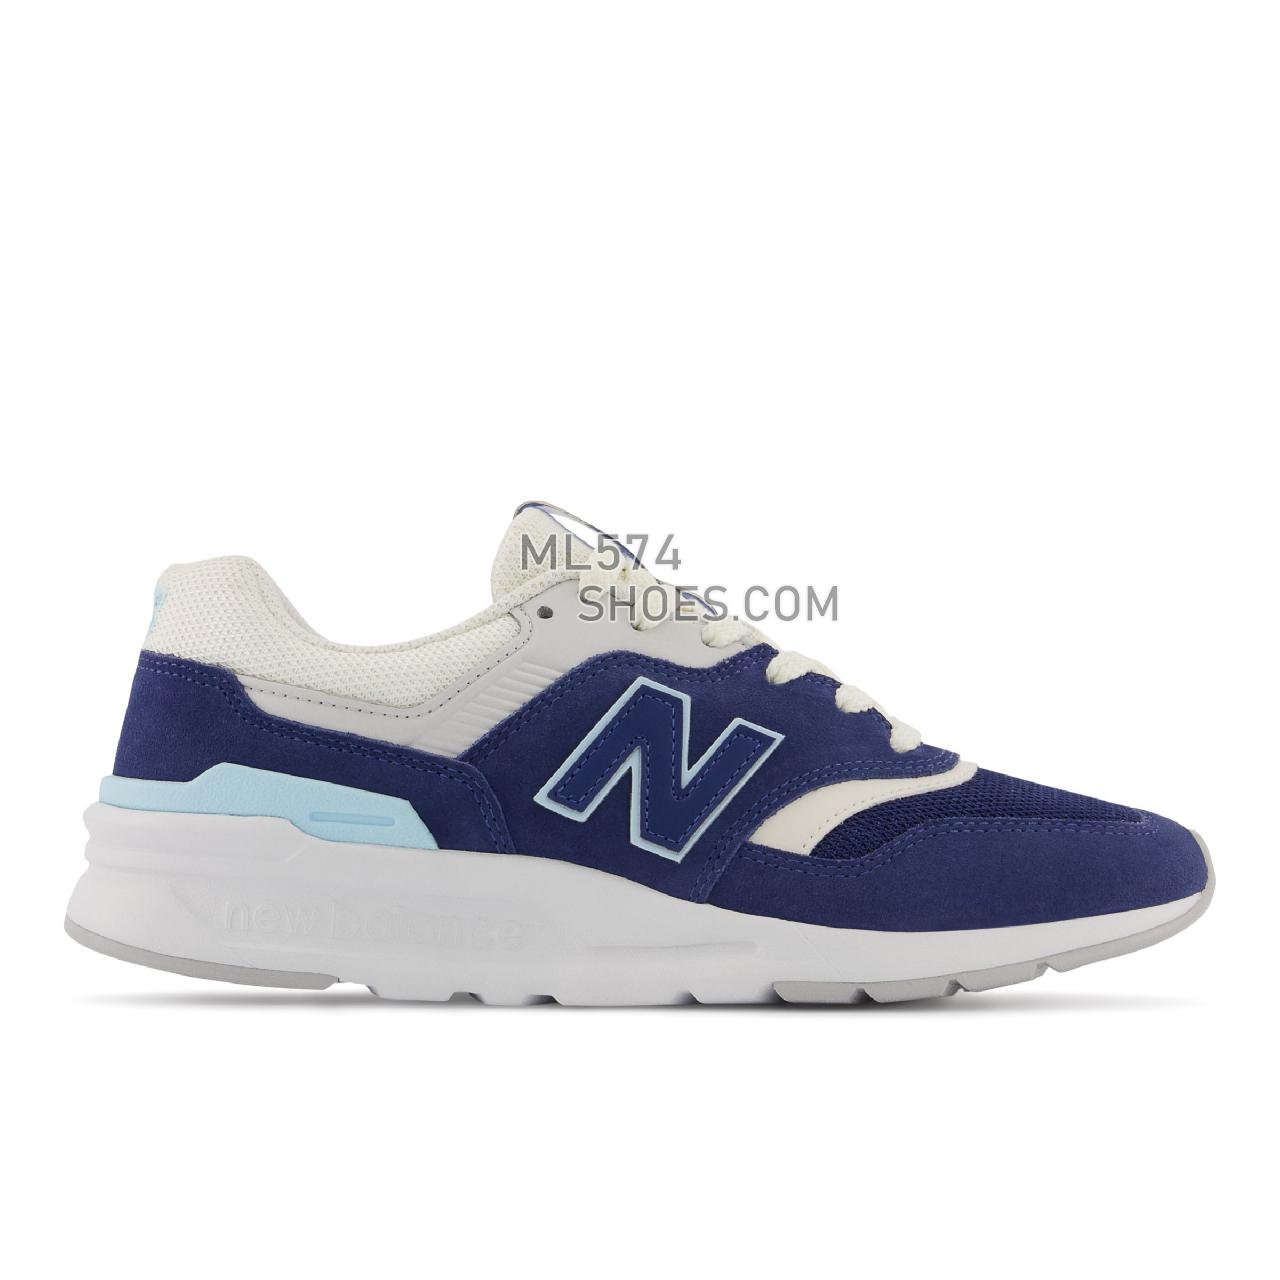 New Balance 997H - Women's Sport Style Sneakers - Moon Shadow with Bleach Blue - CW997HSW